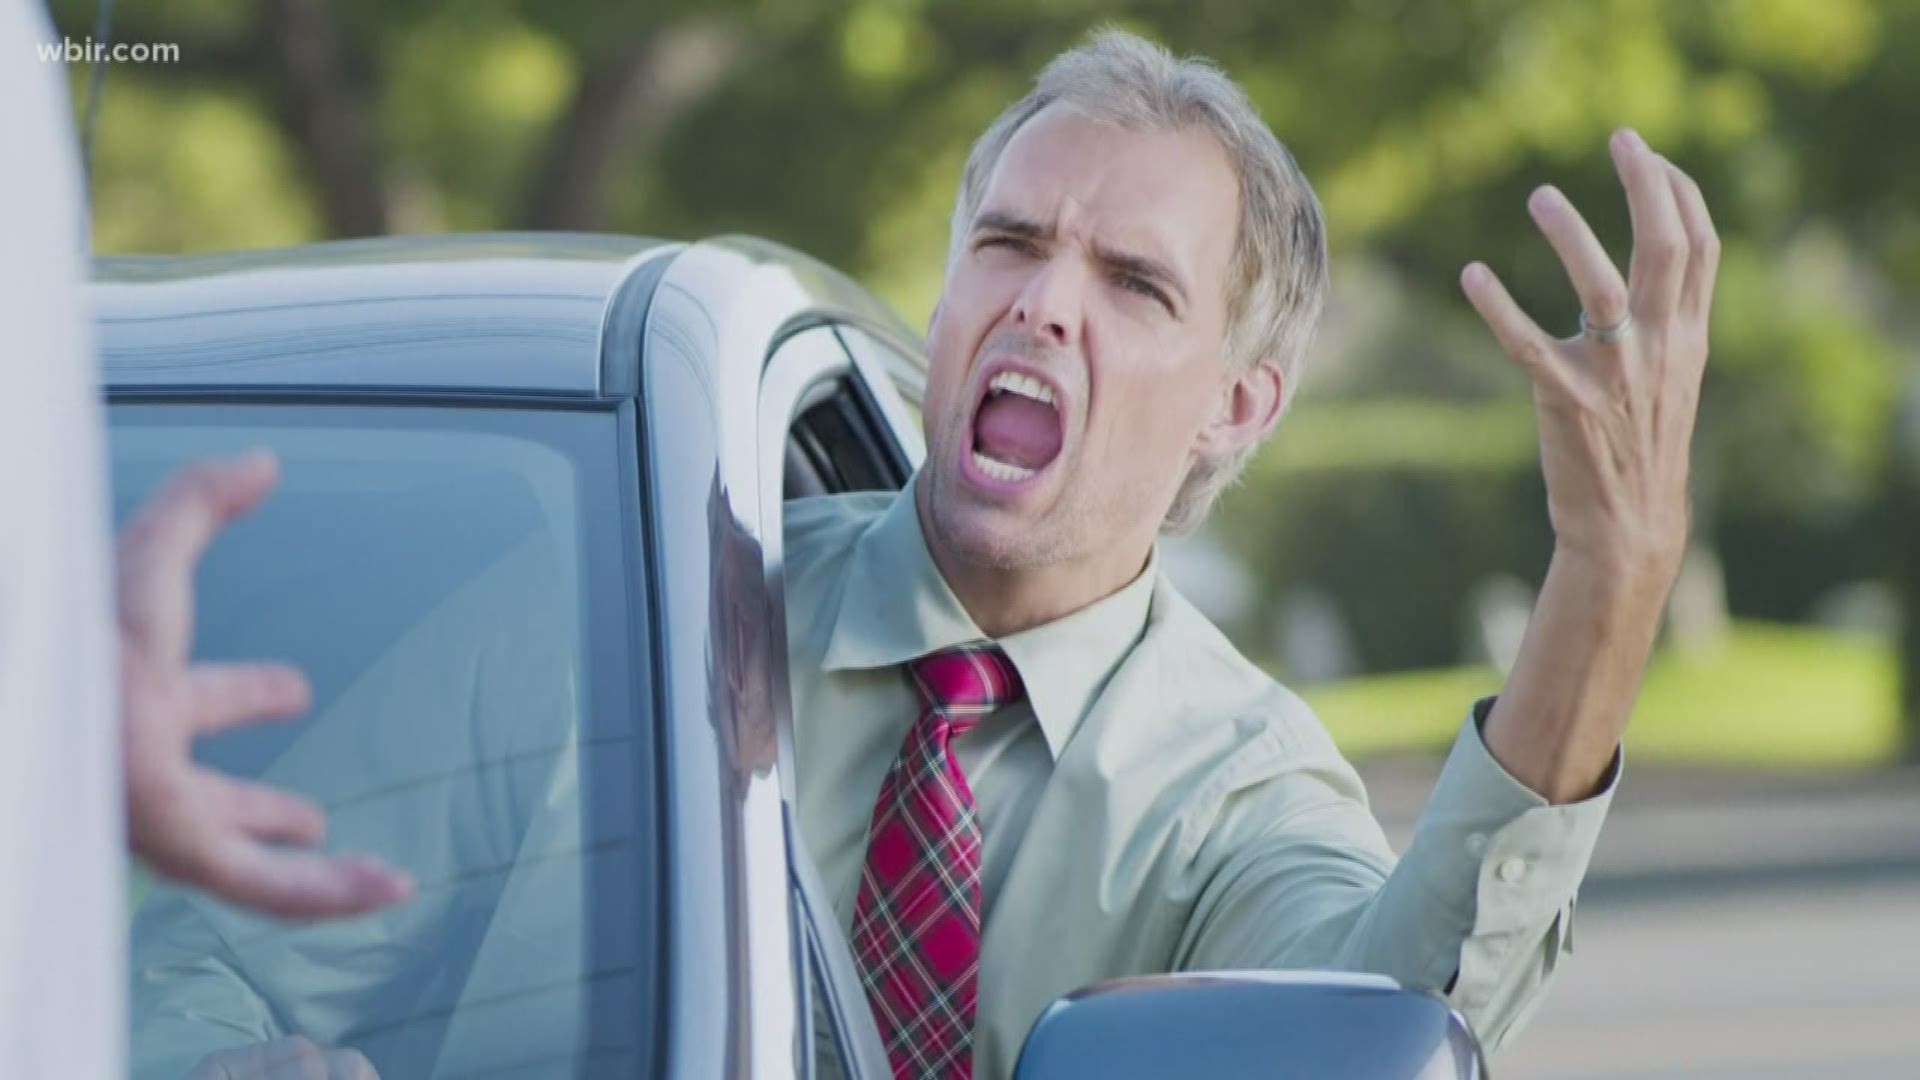 Bad grades may not be so bad. Plus, there's a new, healthy oil in town! Finally, who really gets road rage?